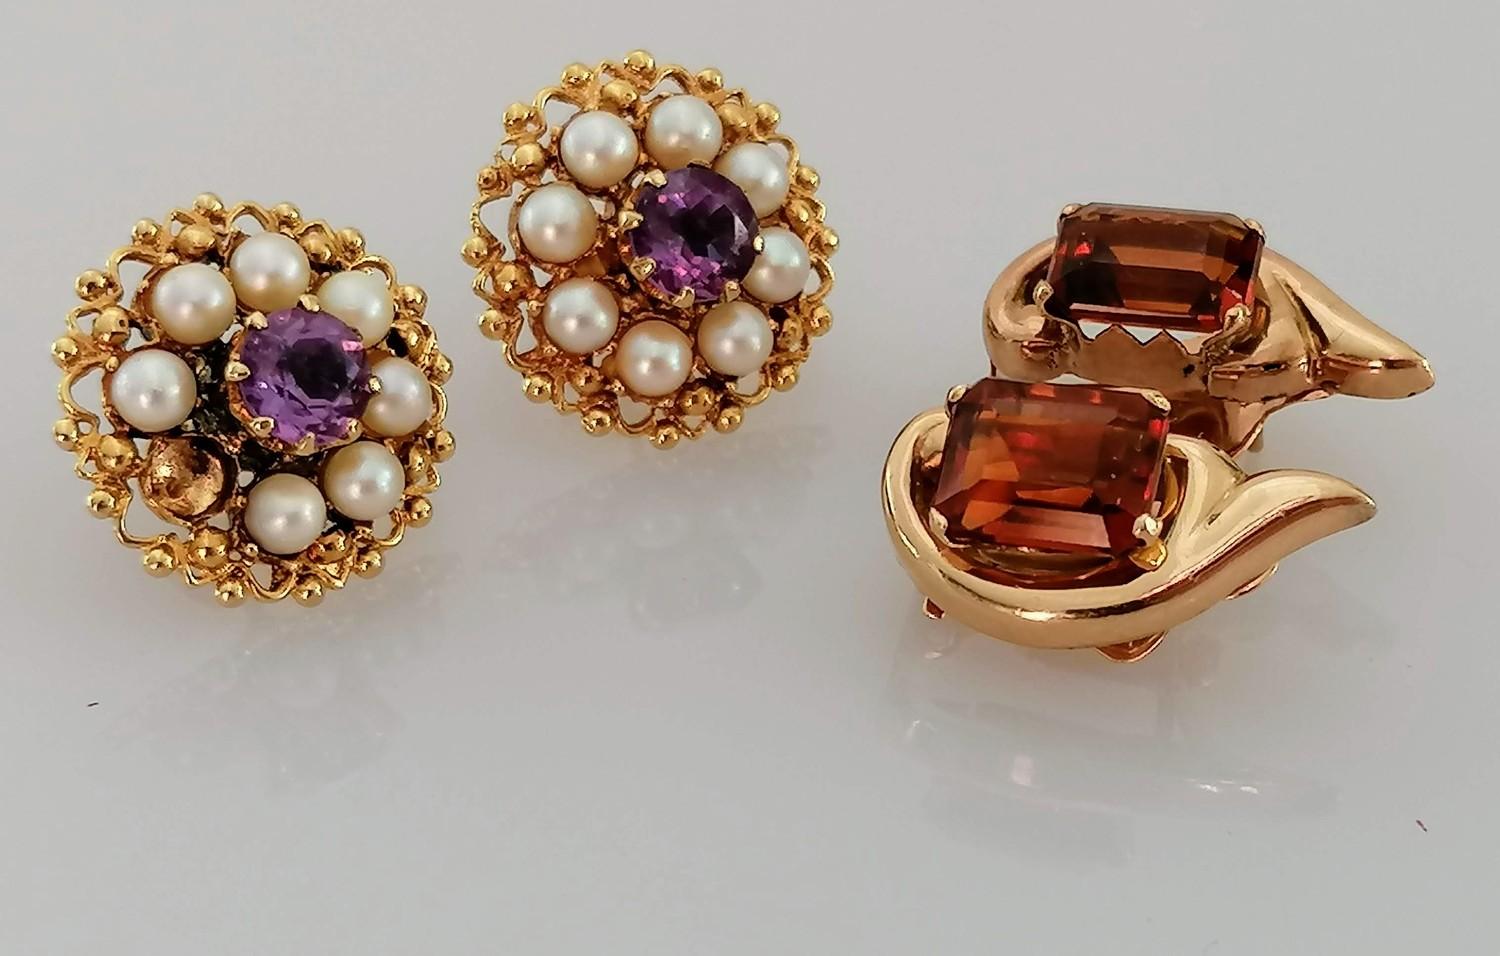 A pair of 9ct gold earrings with amethyst and pearl decoration, hallmarked, 6g, one pearl missing